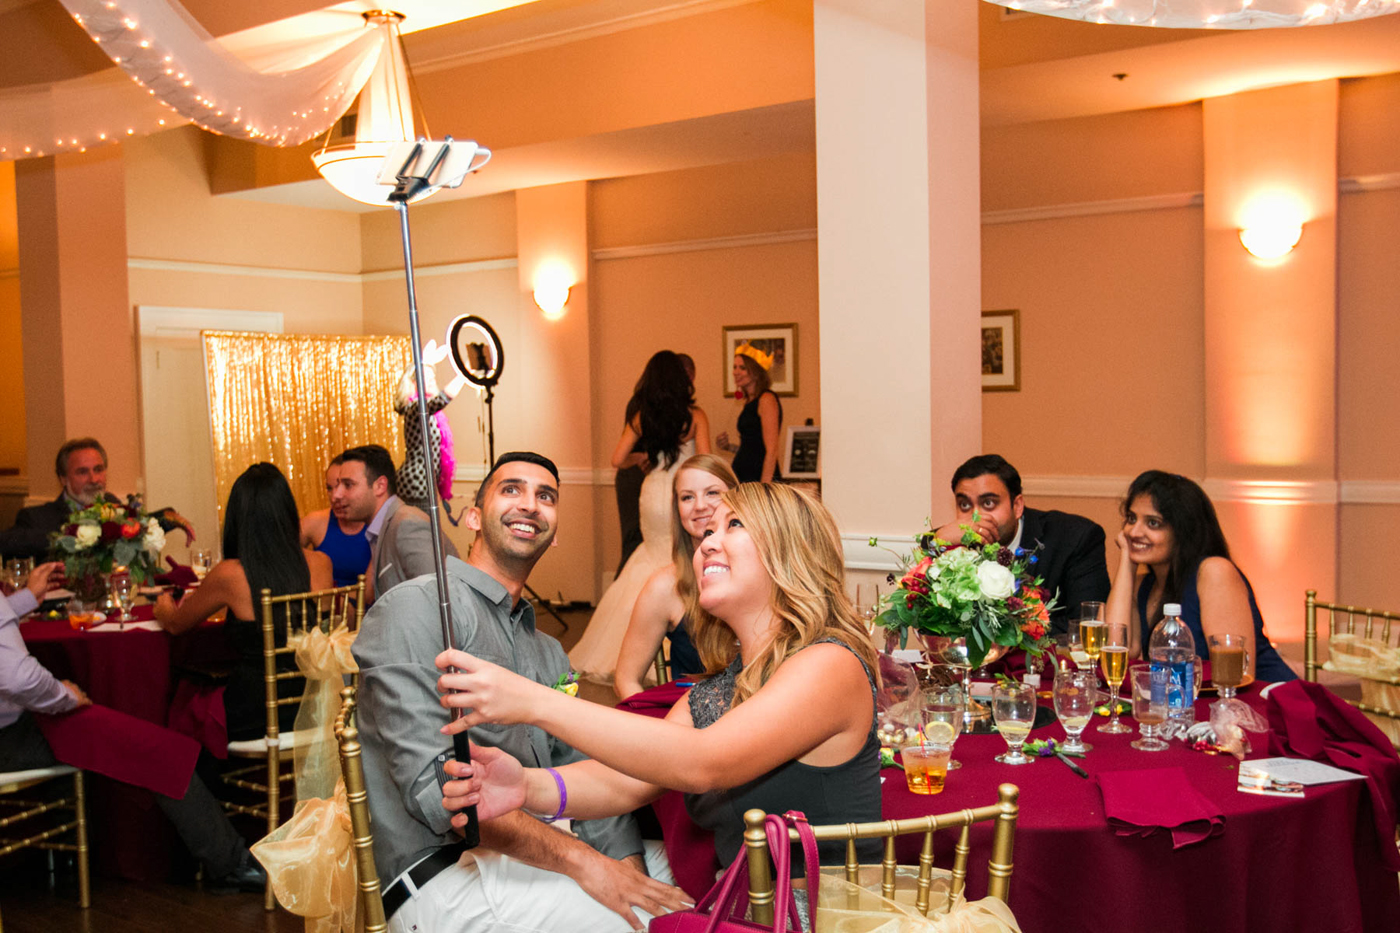 a selfie stick at this wedding reception 